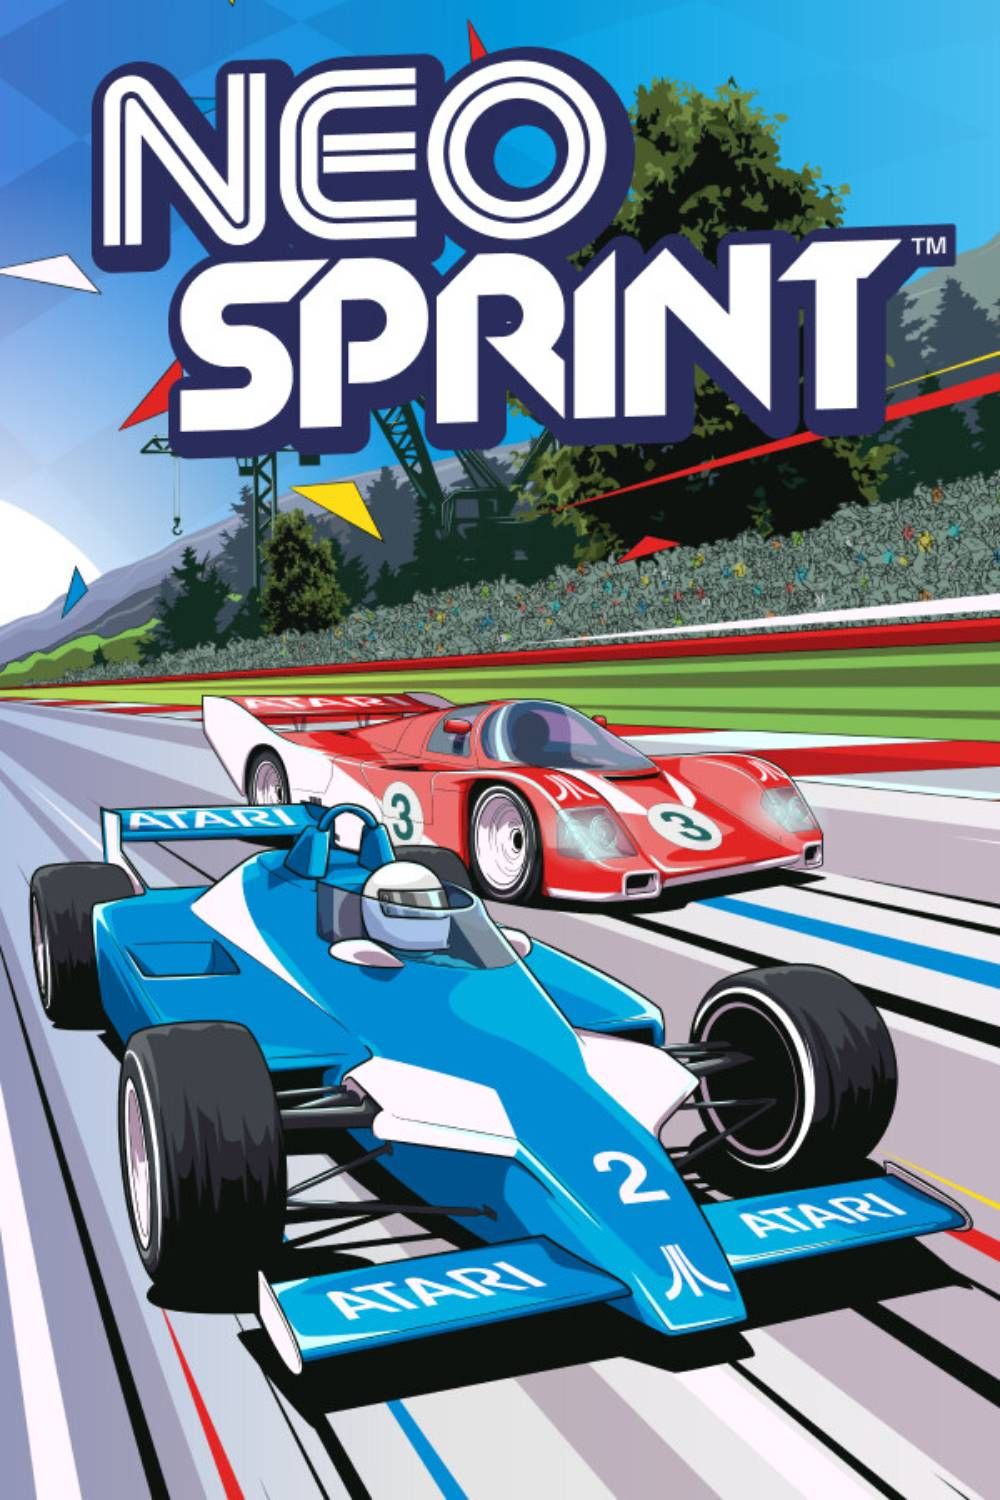 NeoSprint Tag Page Cover Art